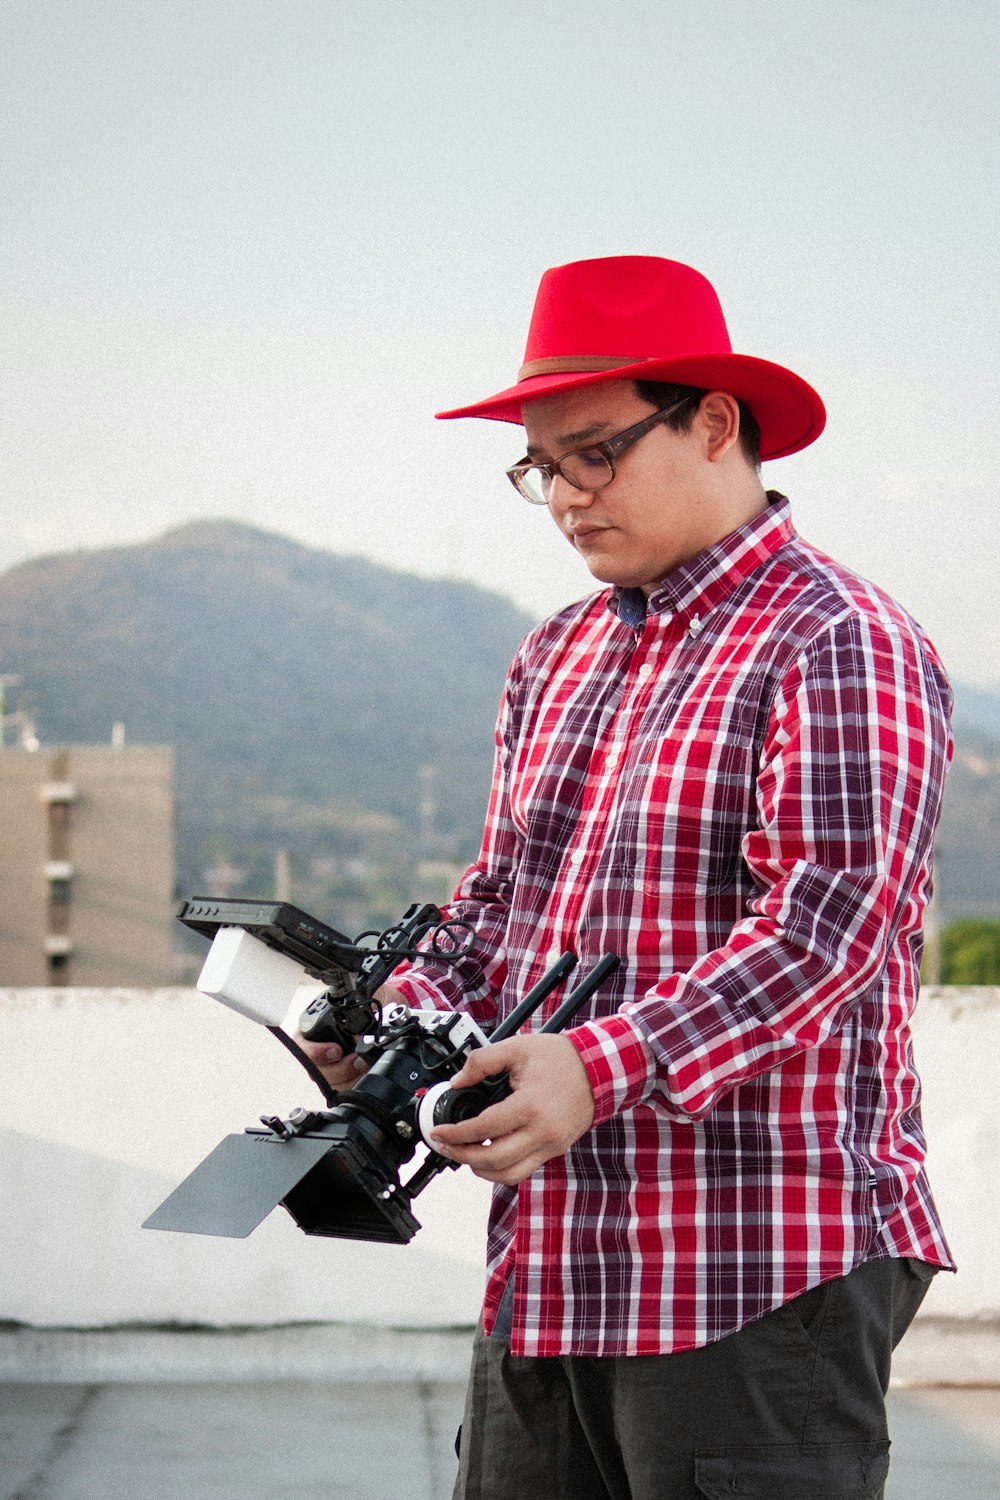 a man in a red hat holding a camera